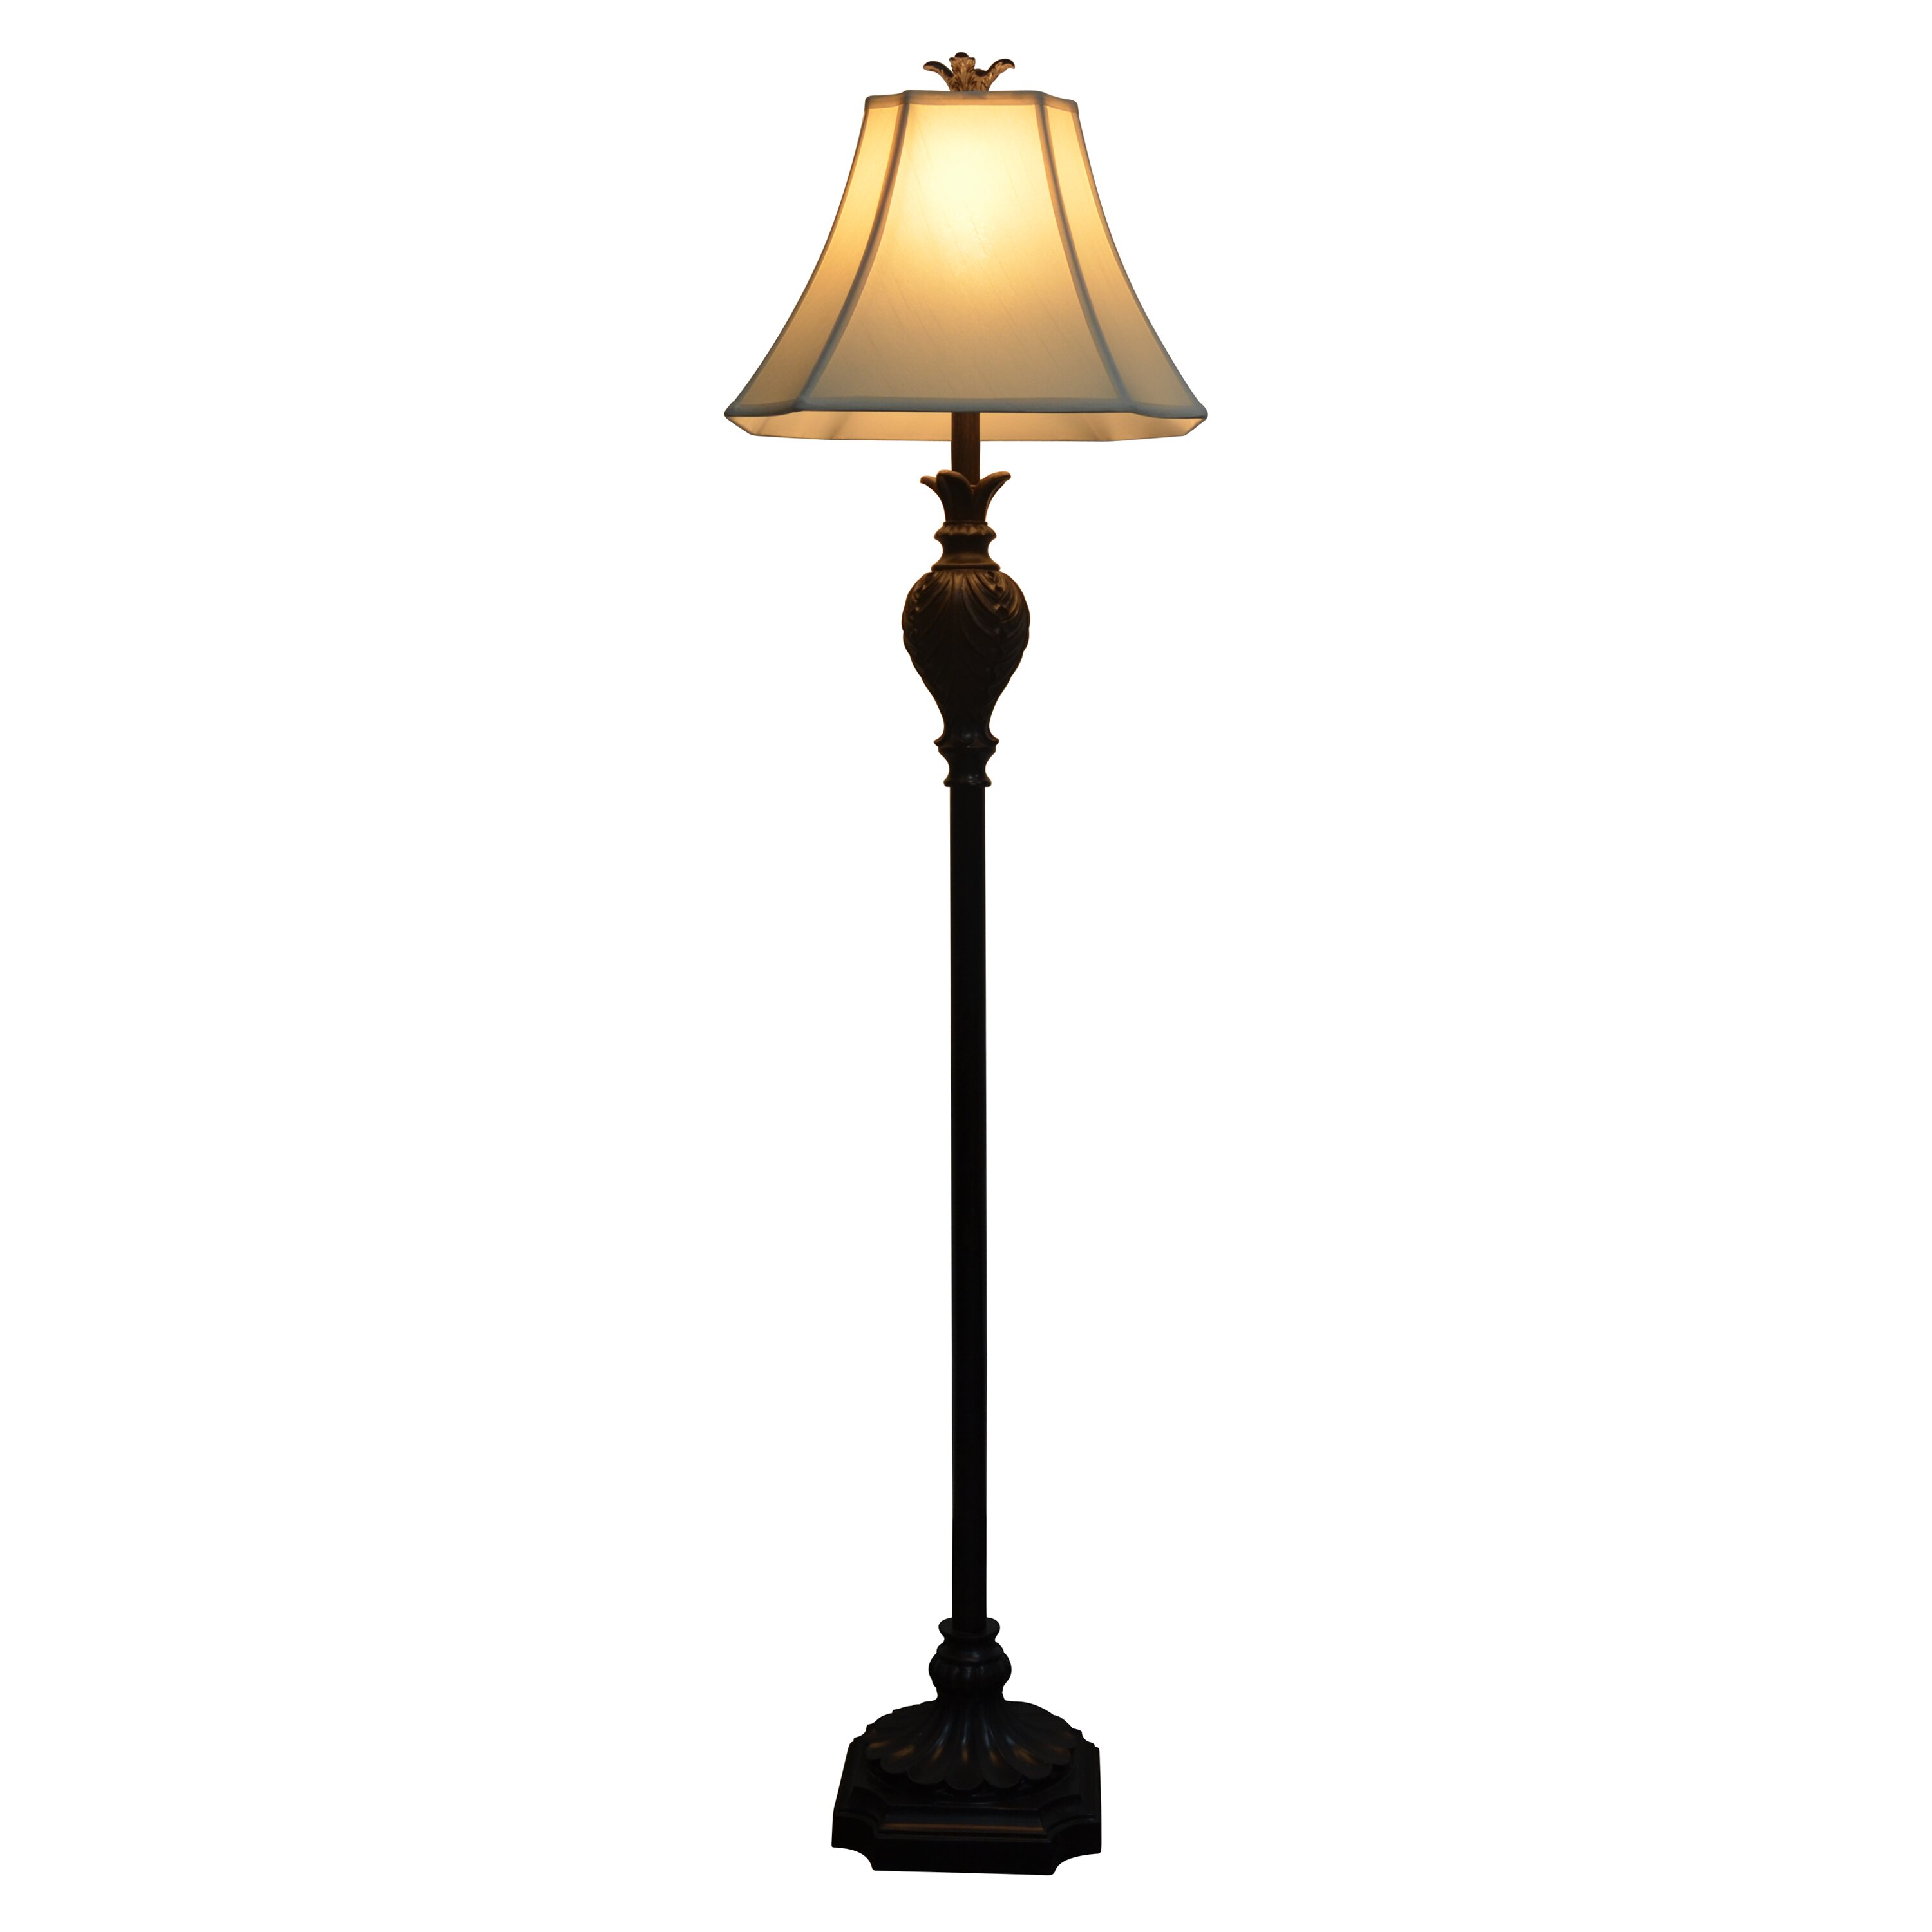 Decor Therapy 61" Floor Lamp & Reviews